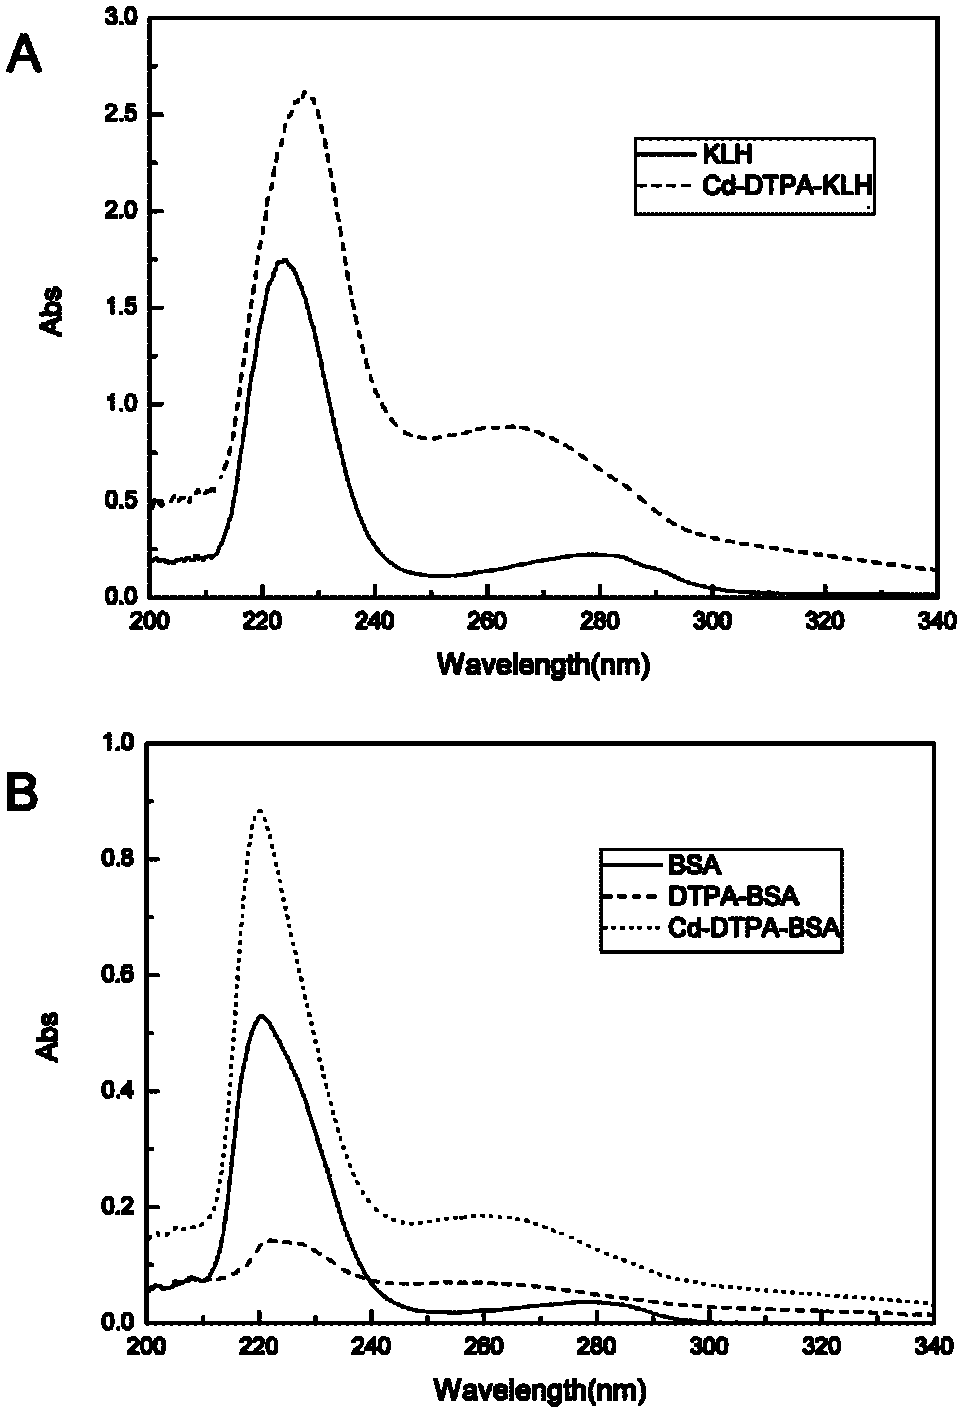 Synthesis and application method of antigens for various heavy metals